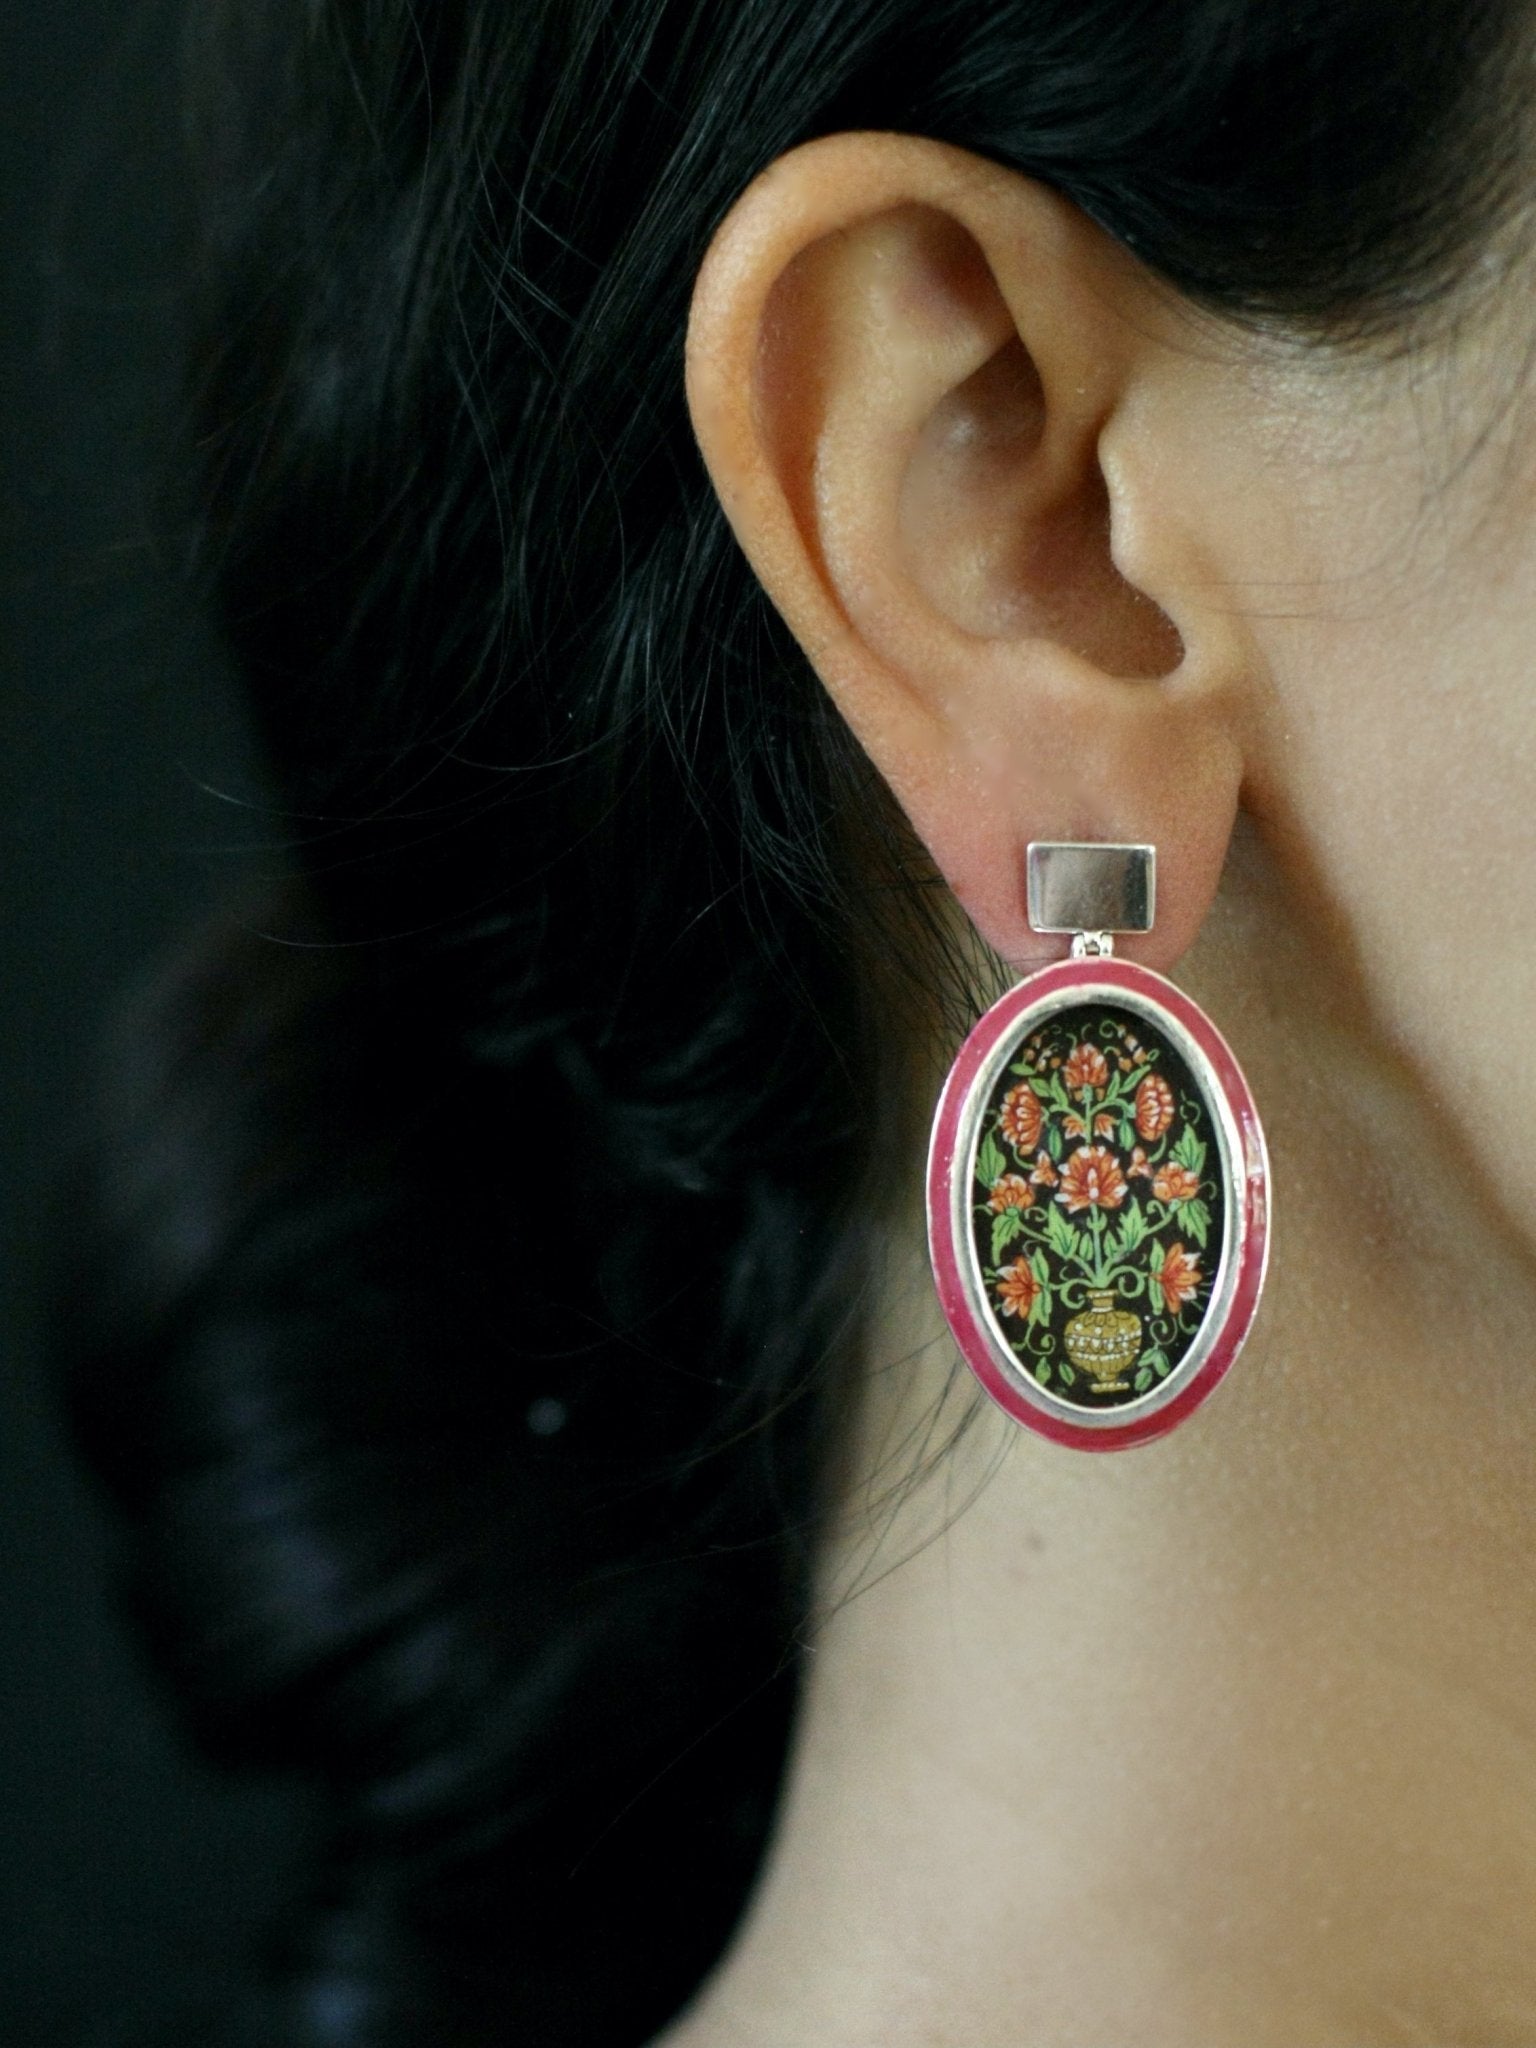 Luxurious, and chic, Mughal 'guldan' (vase) oval earrings - Lai